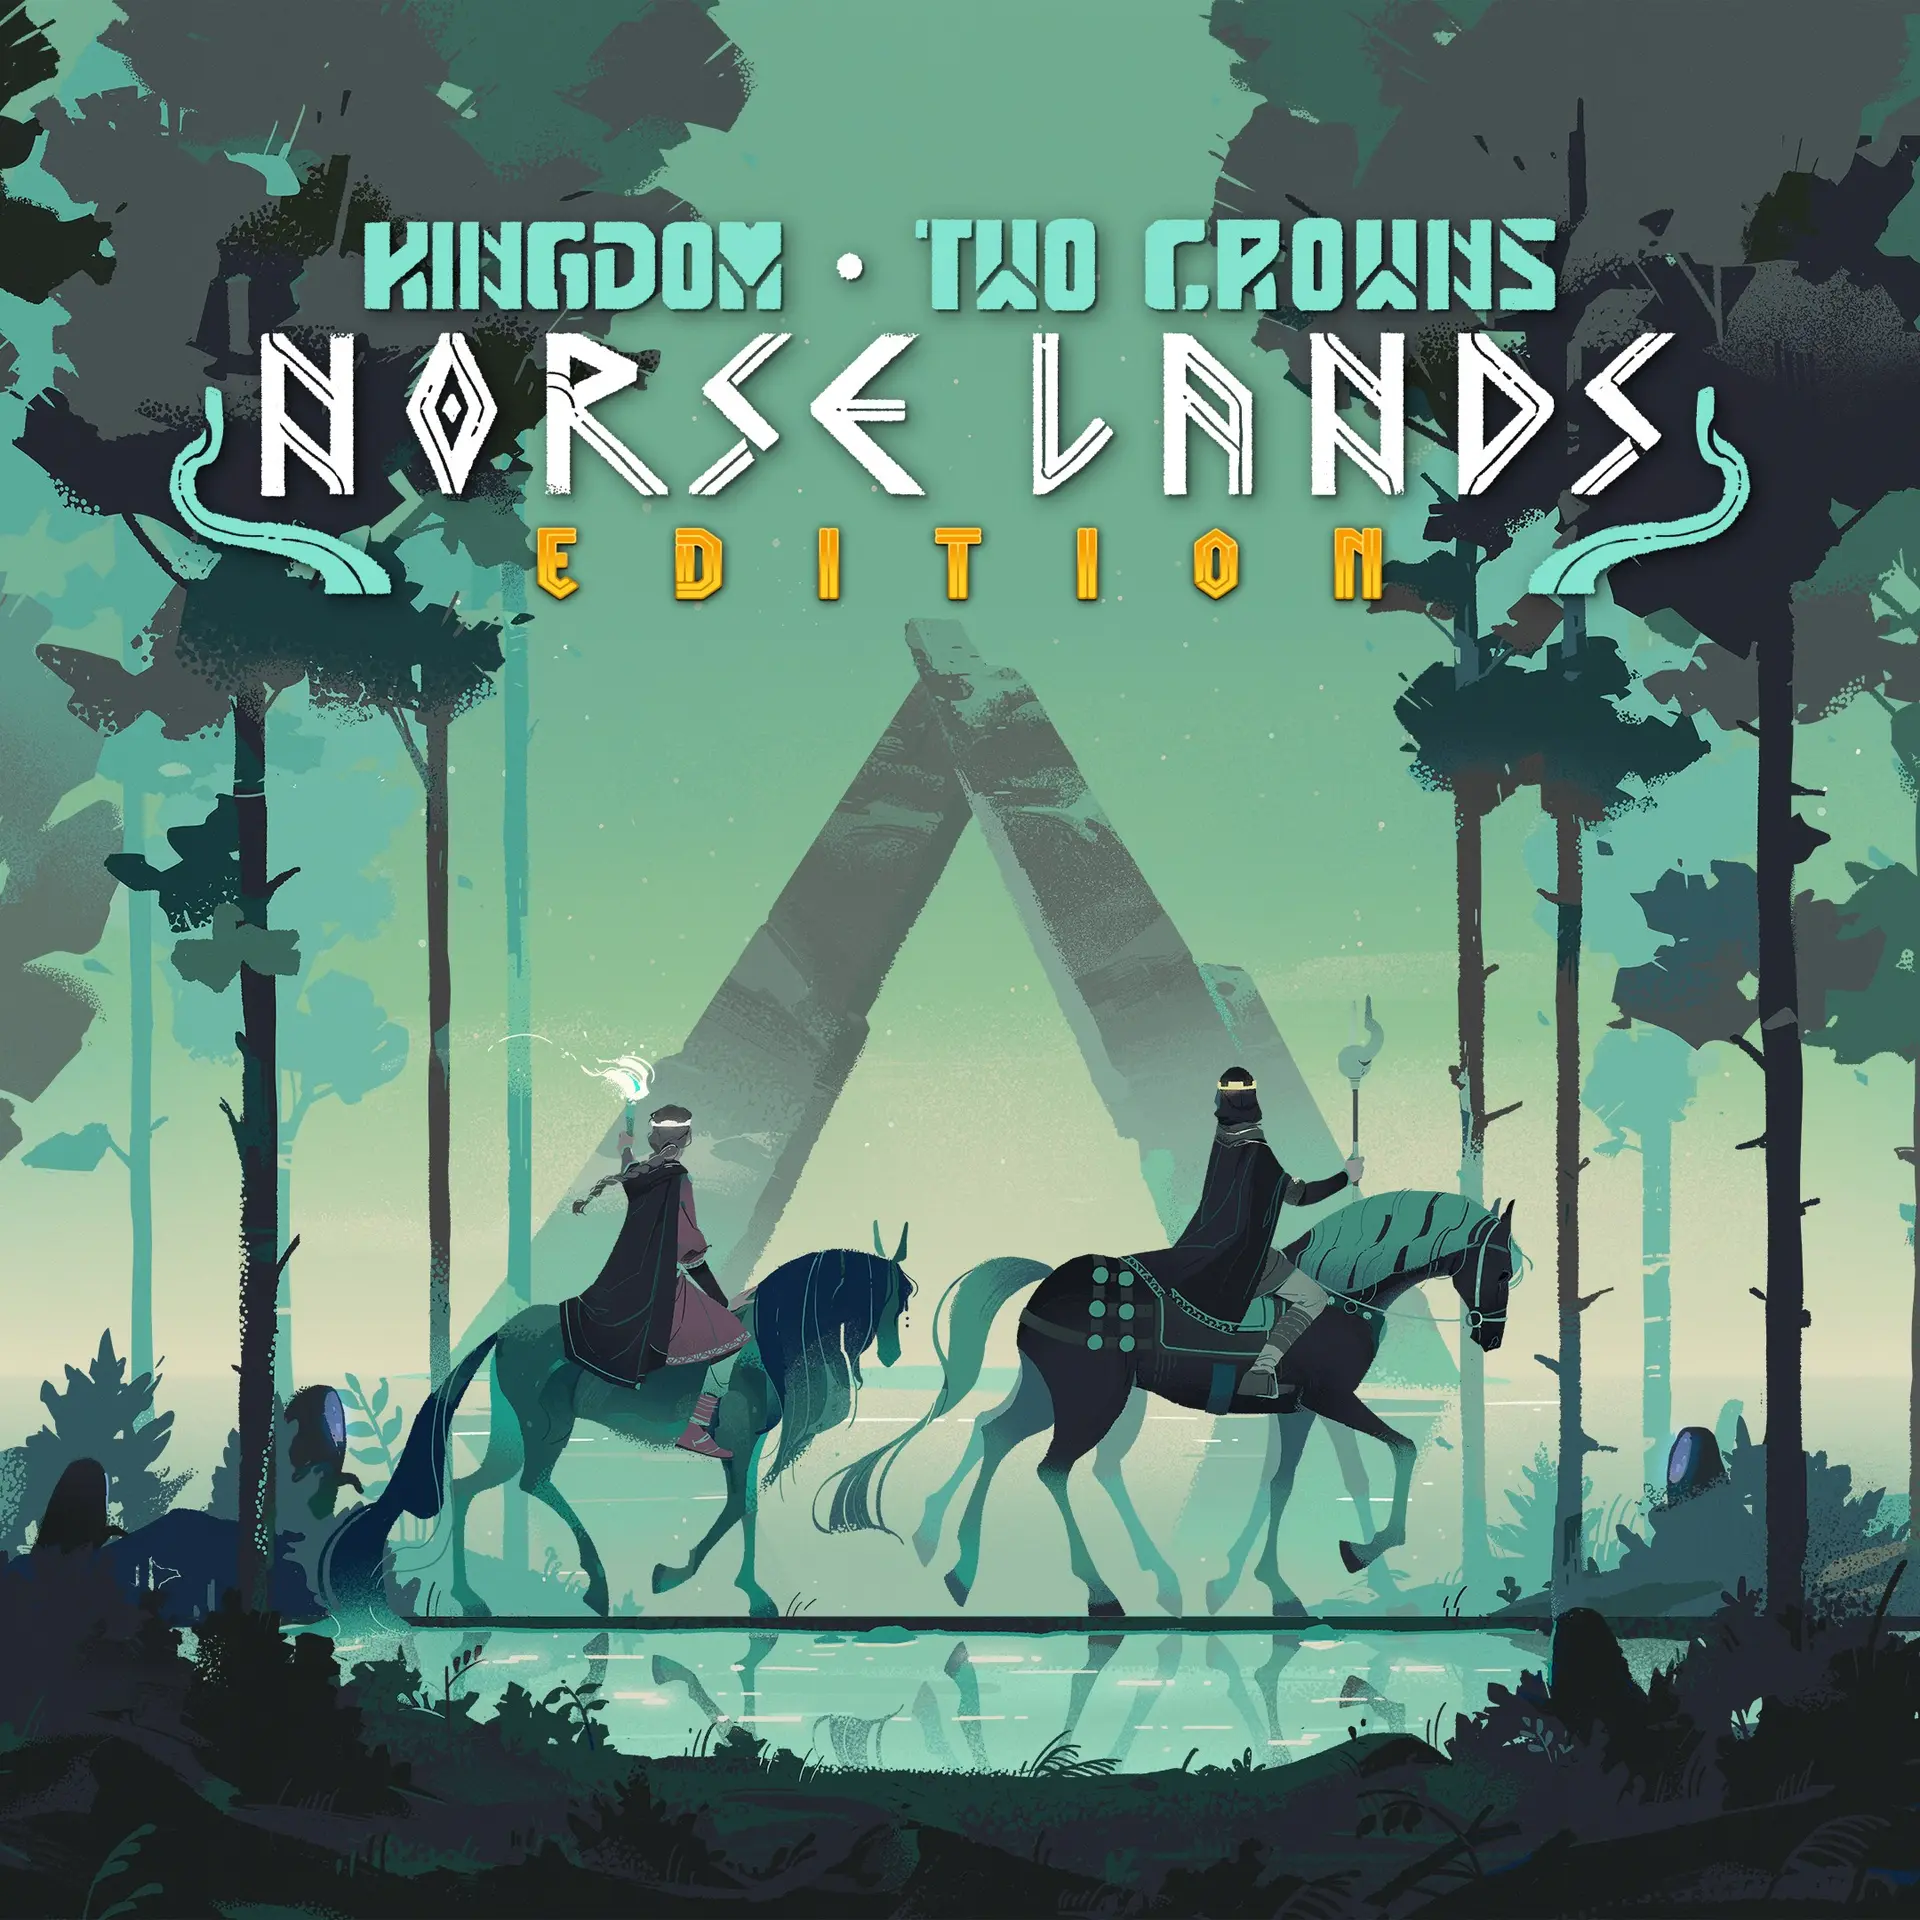 Kingdom Two Crowns: Norse Lands Edition (Xbox Games US)